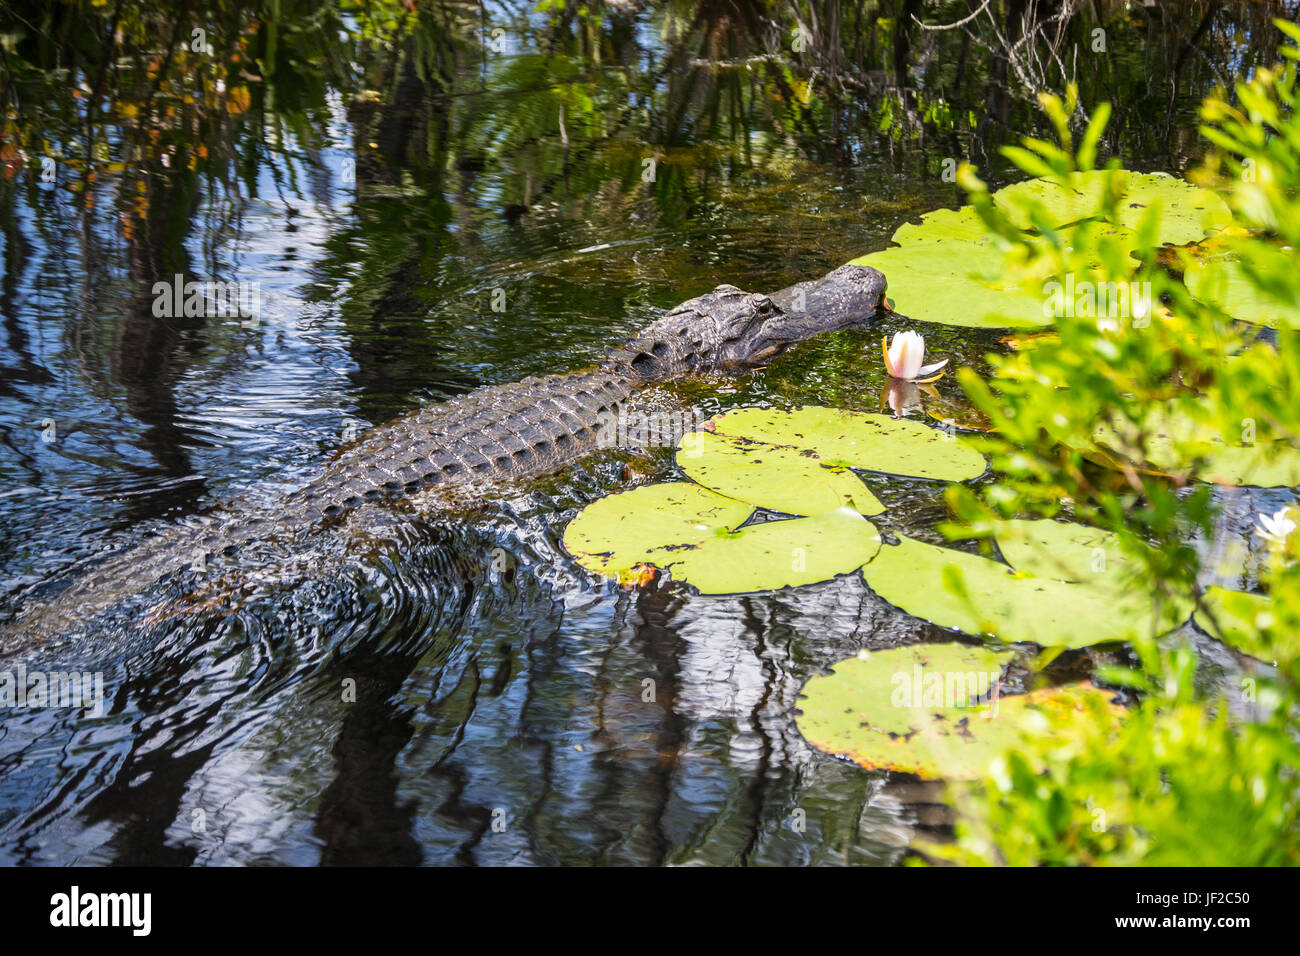 American Alligator Swimming near lily-pads in the Okefenokee Wildlife Refuge. Stock Photo